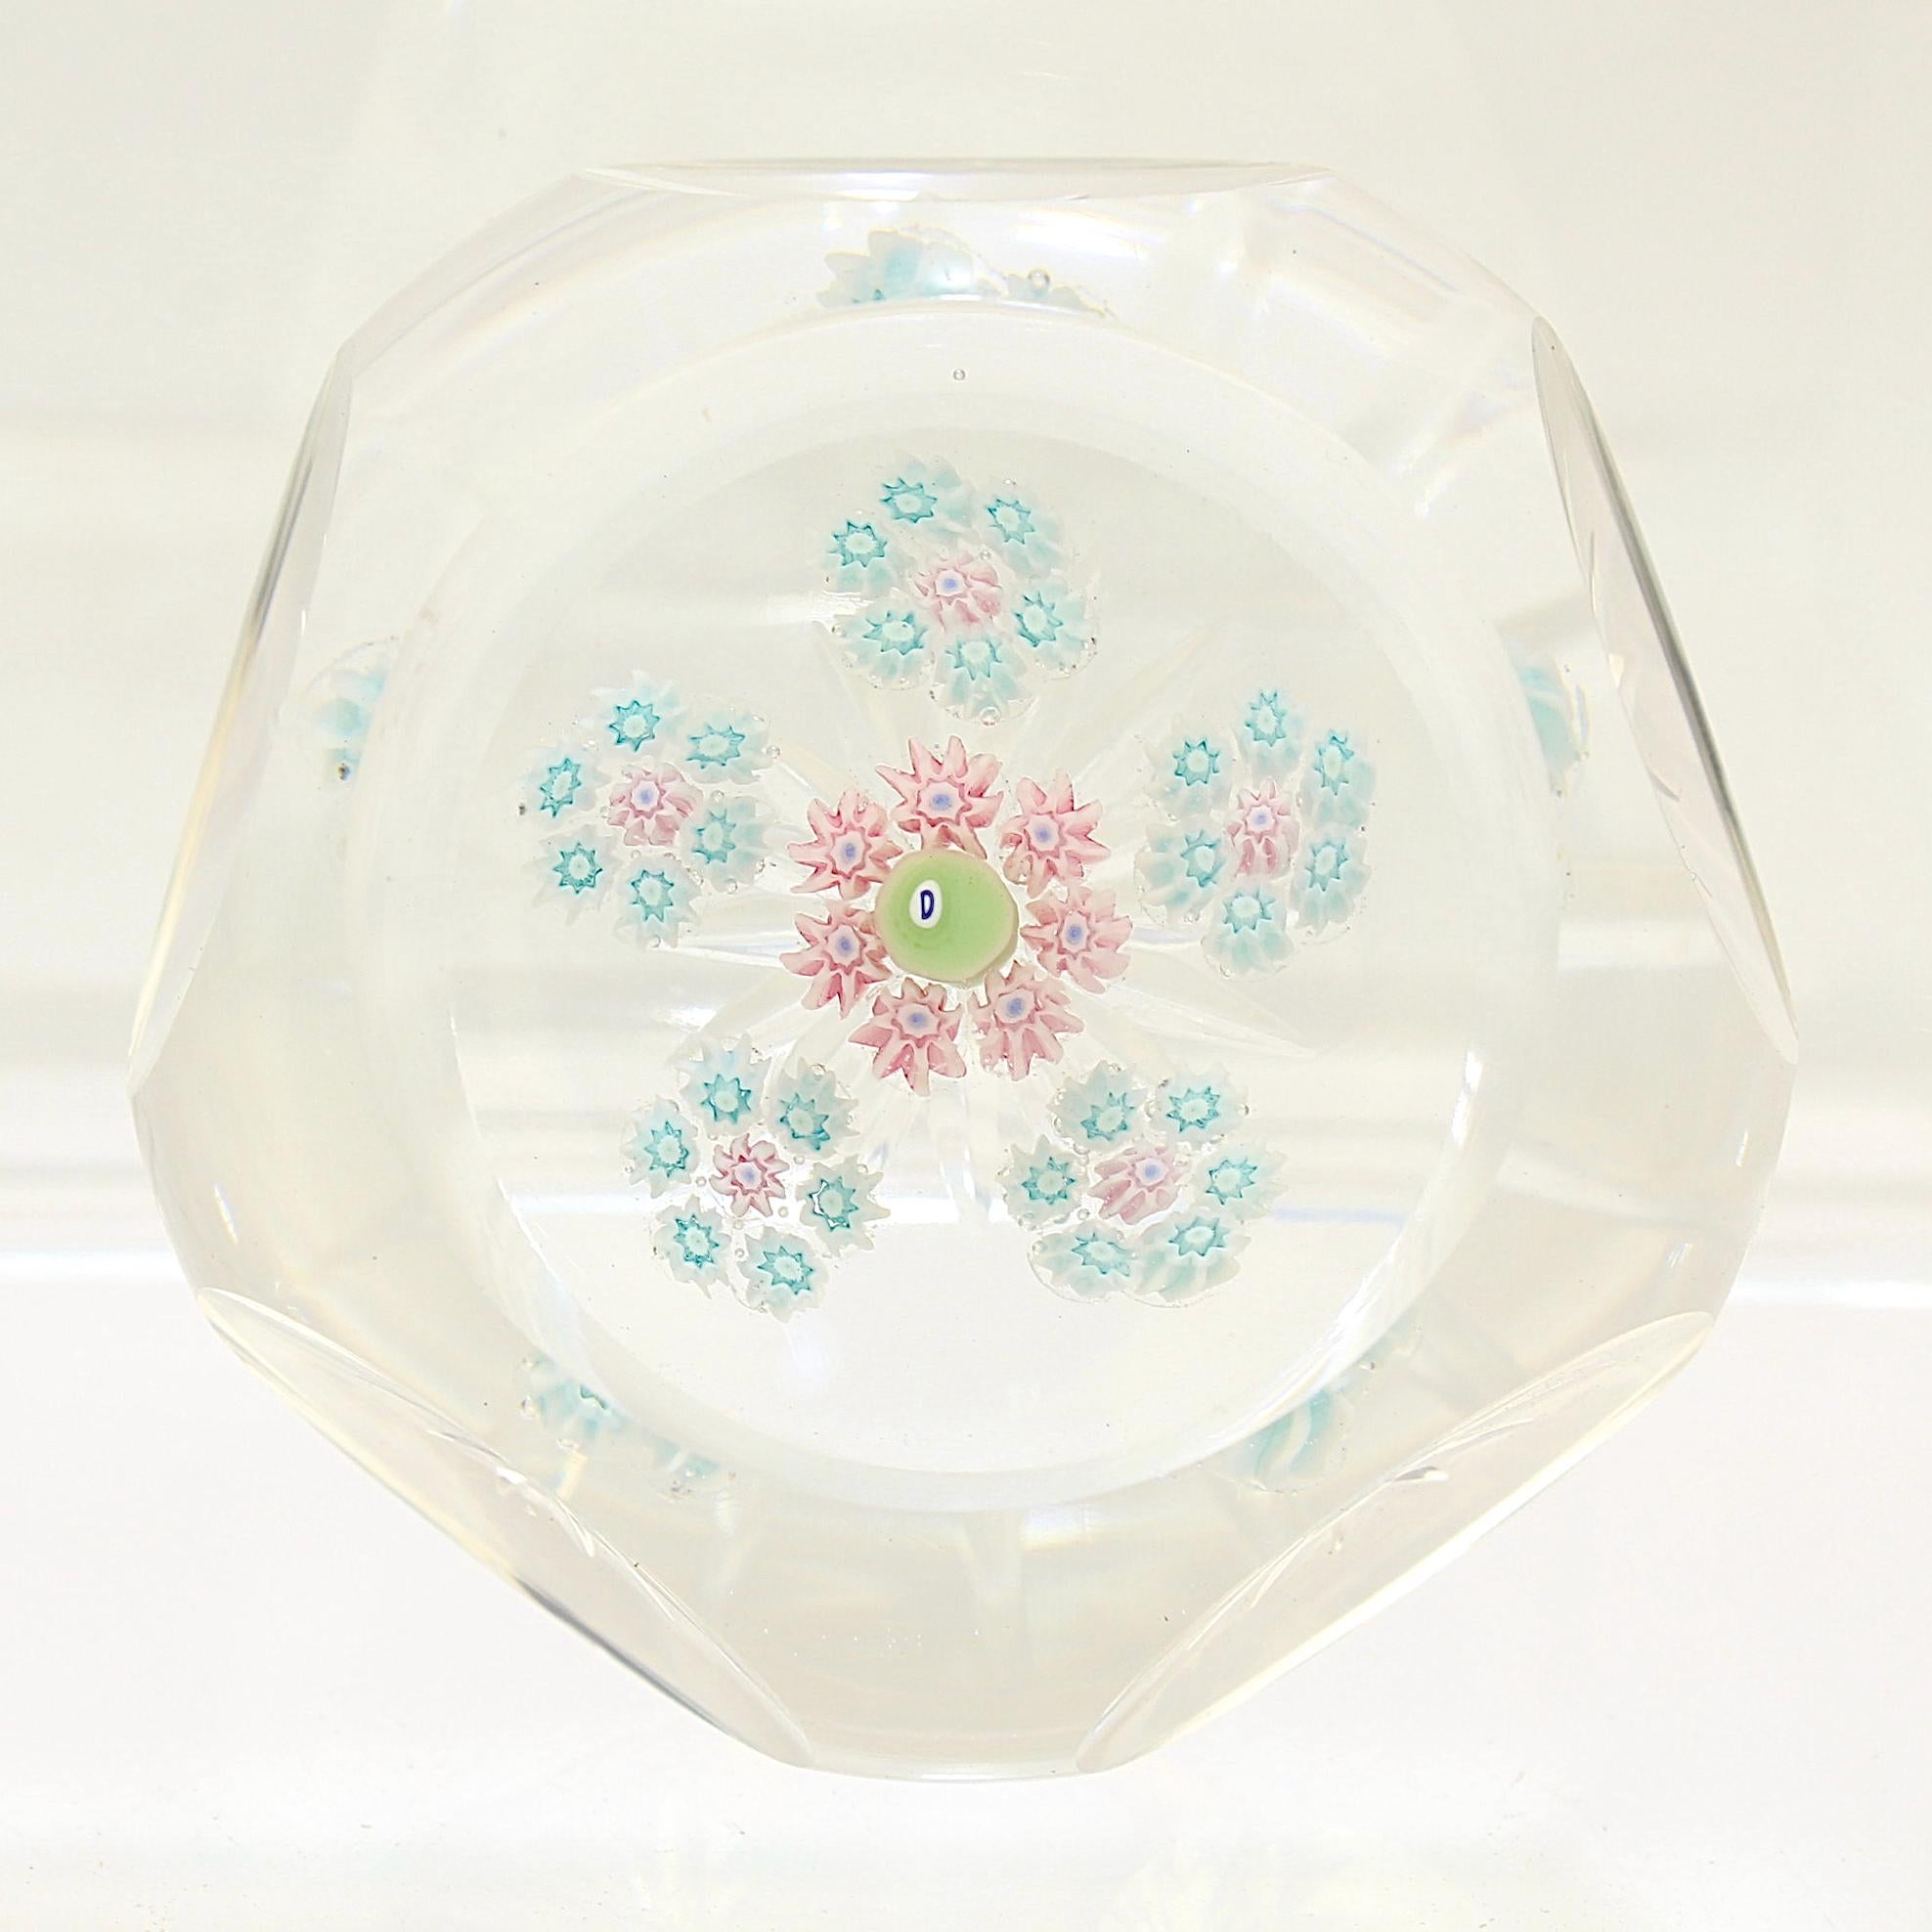 A fine faceted Perthshire spaced millefiori art glass paperweight.

It has pink and light blue canes centered on a 1972 'D' date cane.

The base has a star cut pontil mark.

Date:
1972

Overall condition:
It is in overall good,